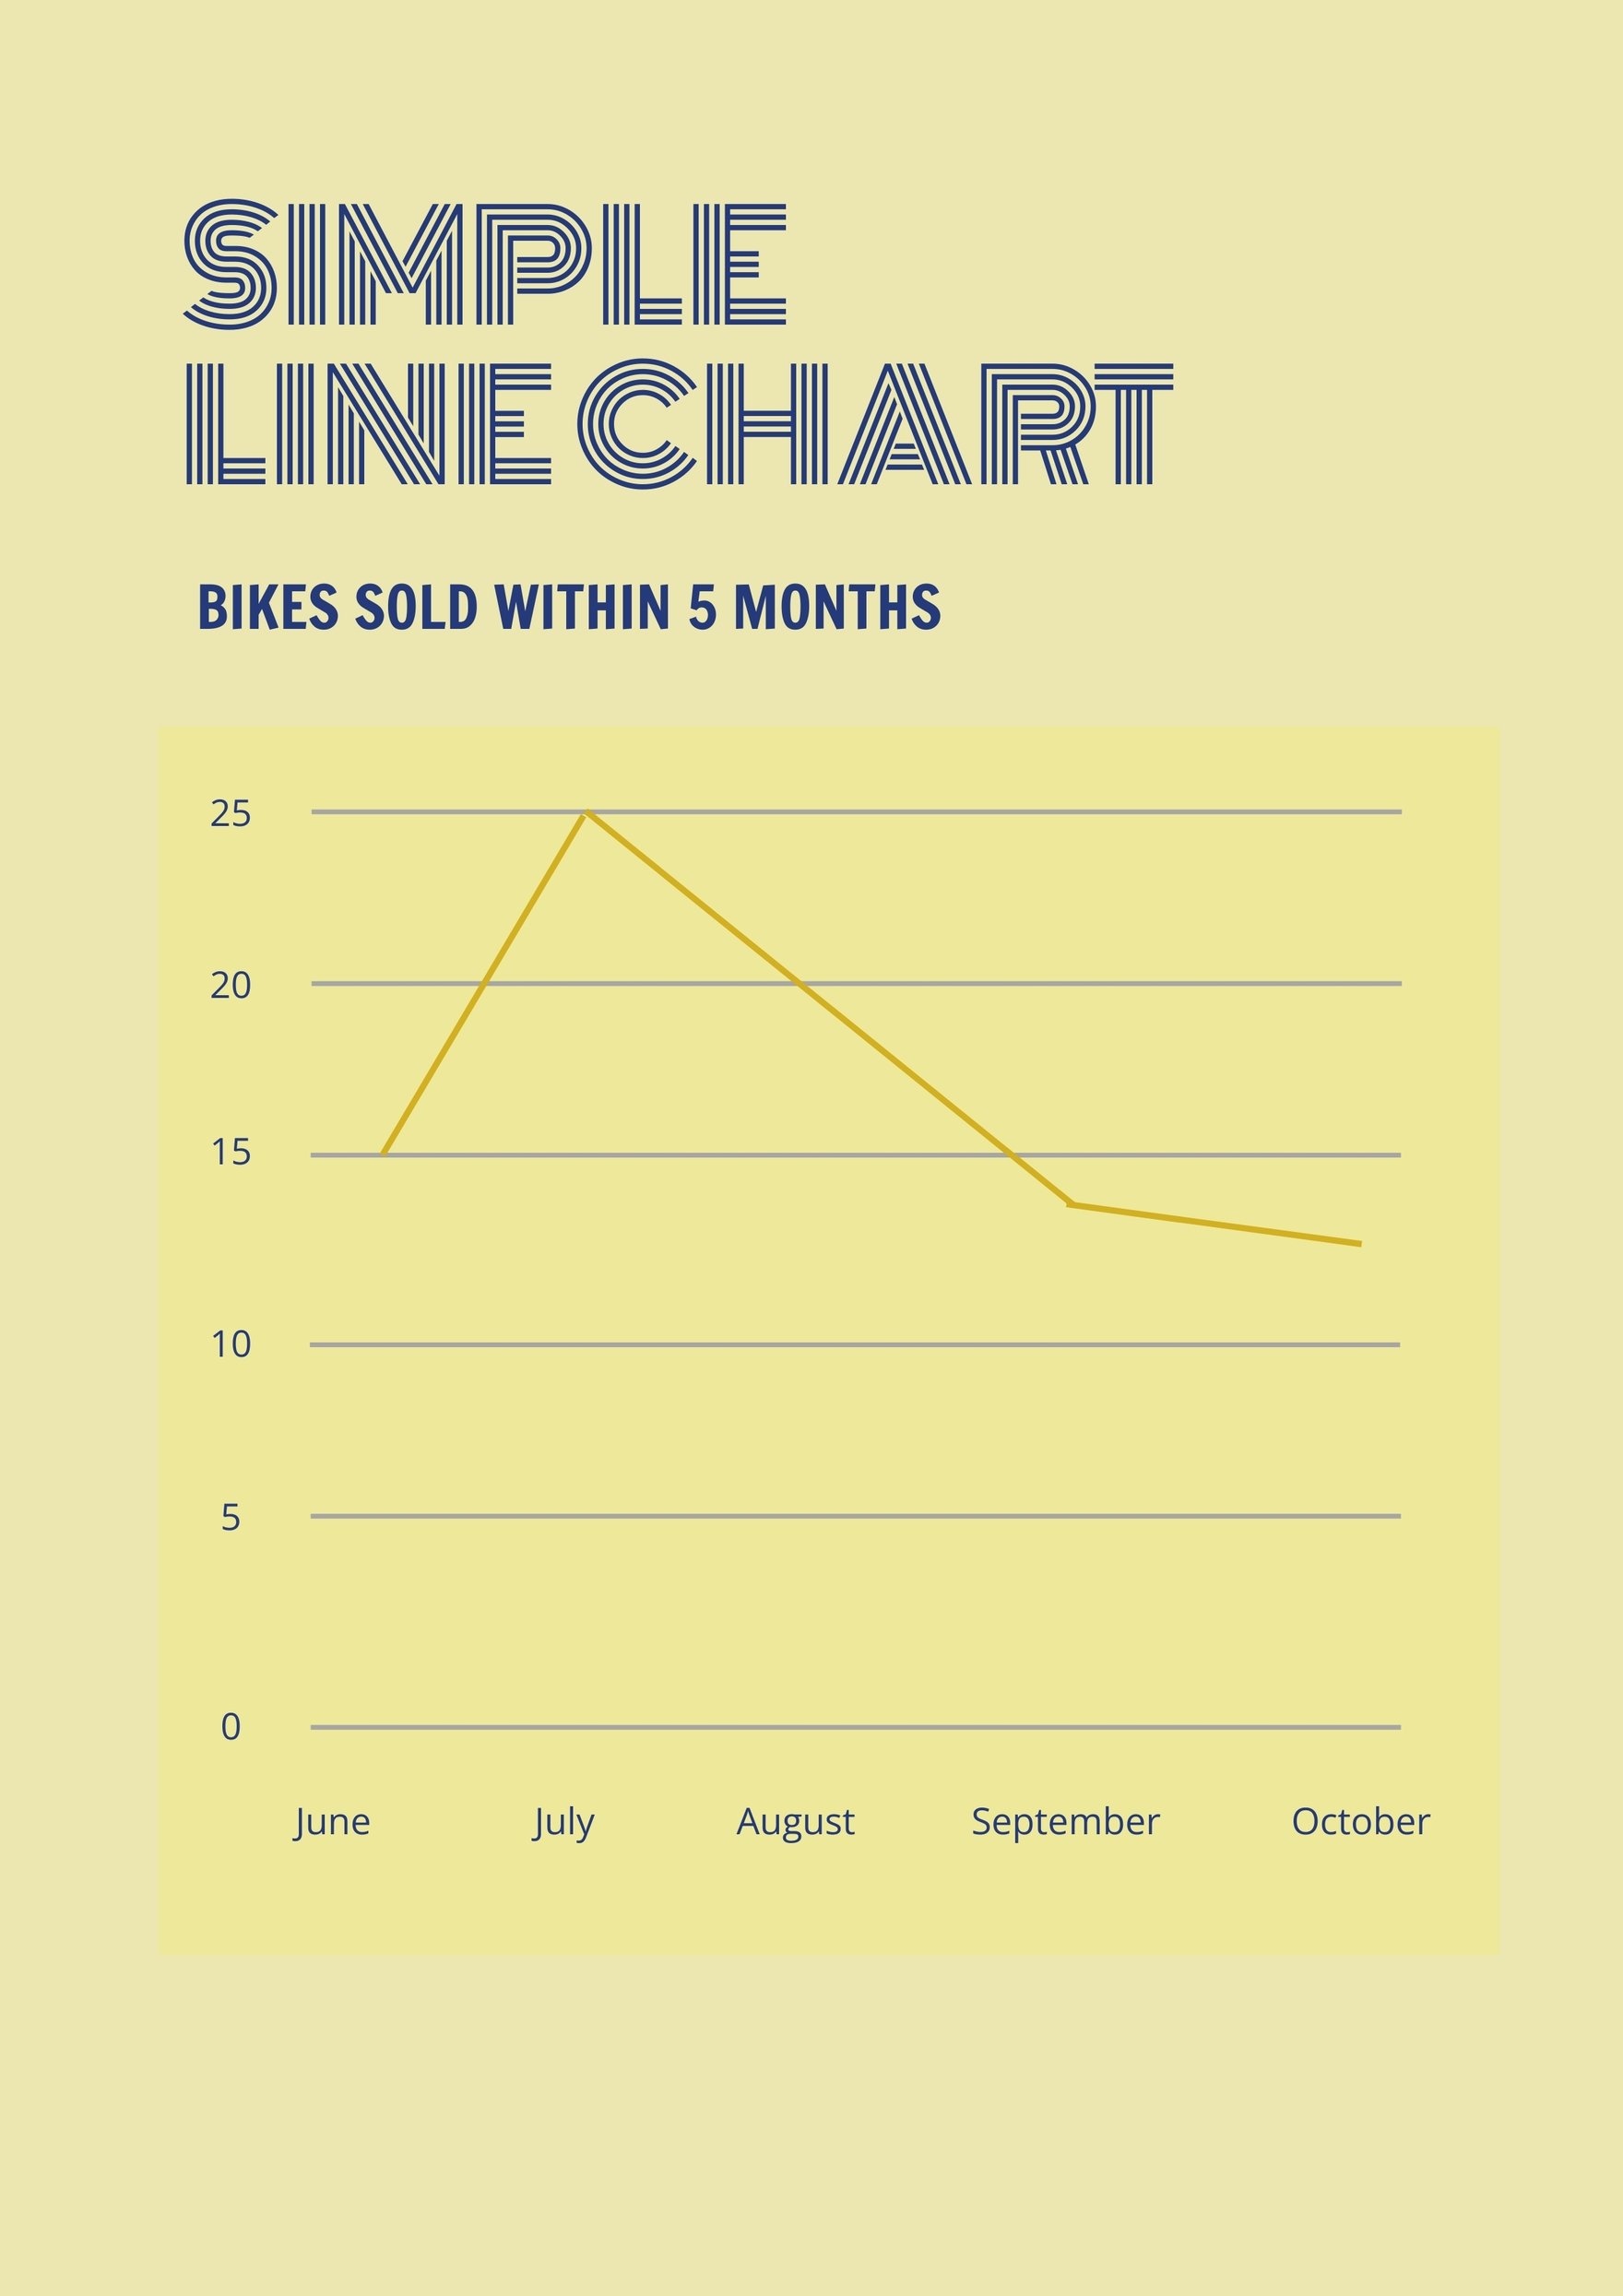 Free Simple Line Chart Template Download in PDF, Illustrator